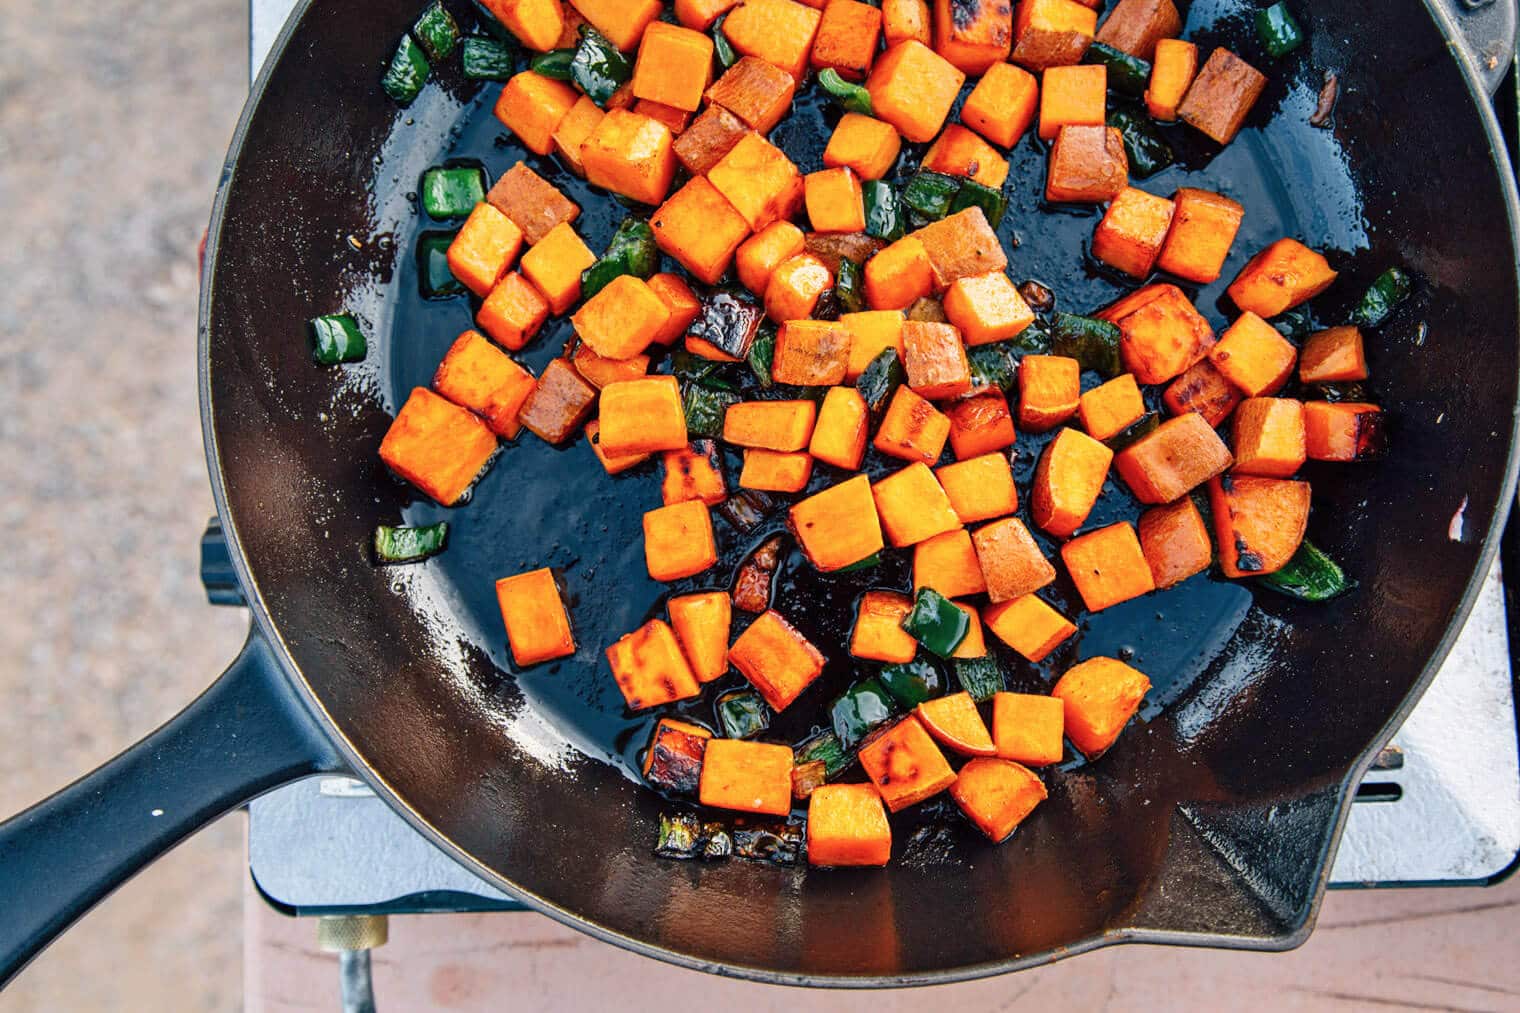 Peppers and sweet potatoes frying in a cast iron skillet